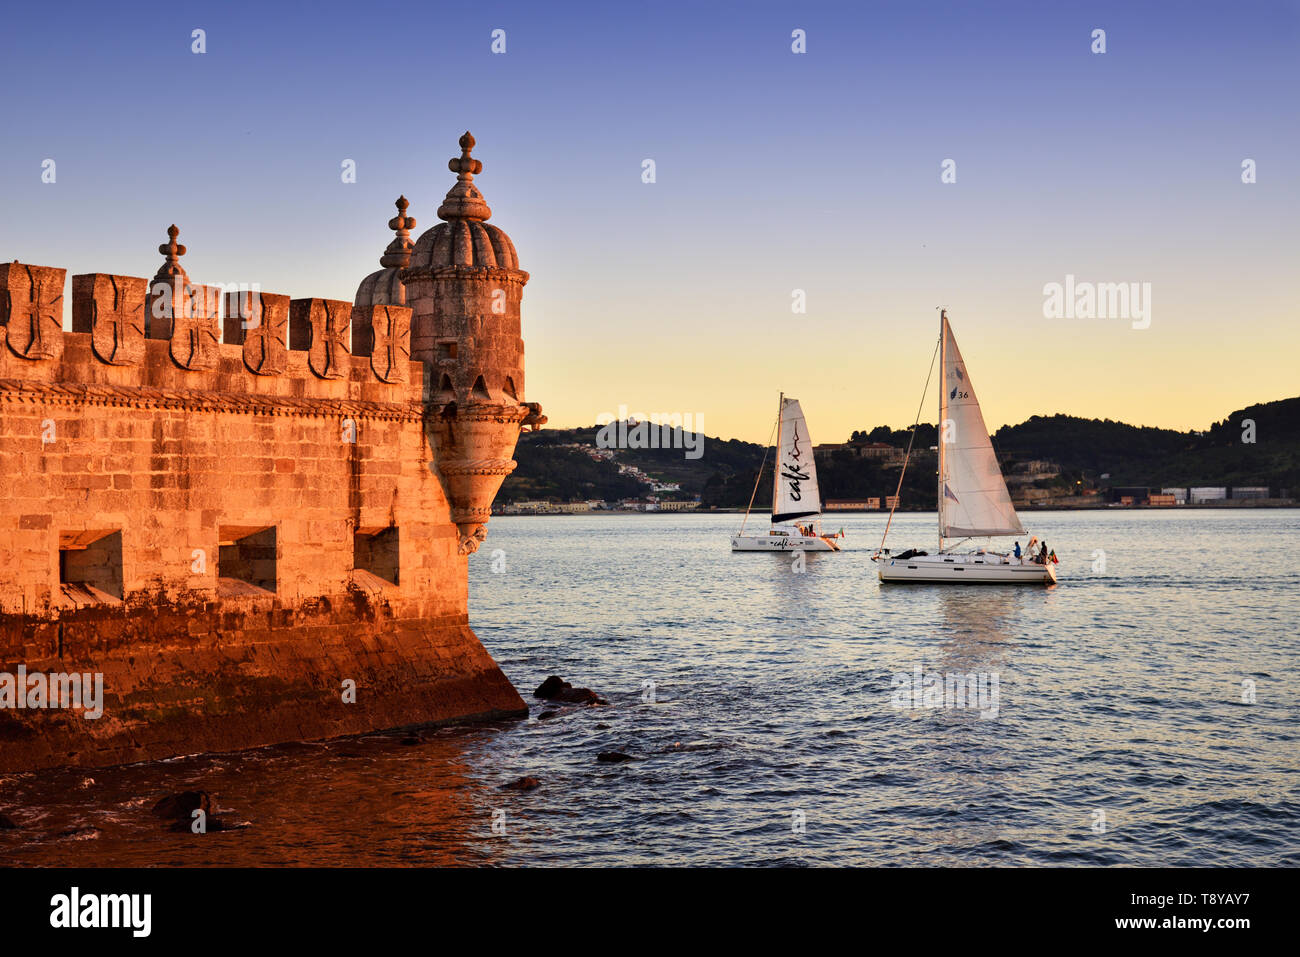 Torre de Belém (Belém Tower), in the Tagus river, a UNESCO World Heritage Site built in the 16th century in Portuguese Manueline Style at twilight. It Stock Photo